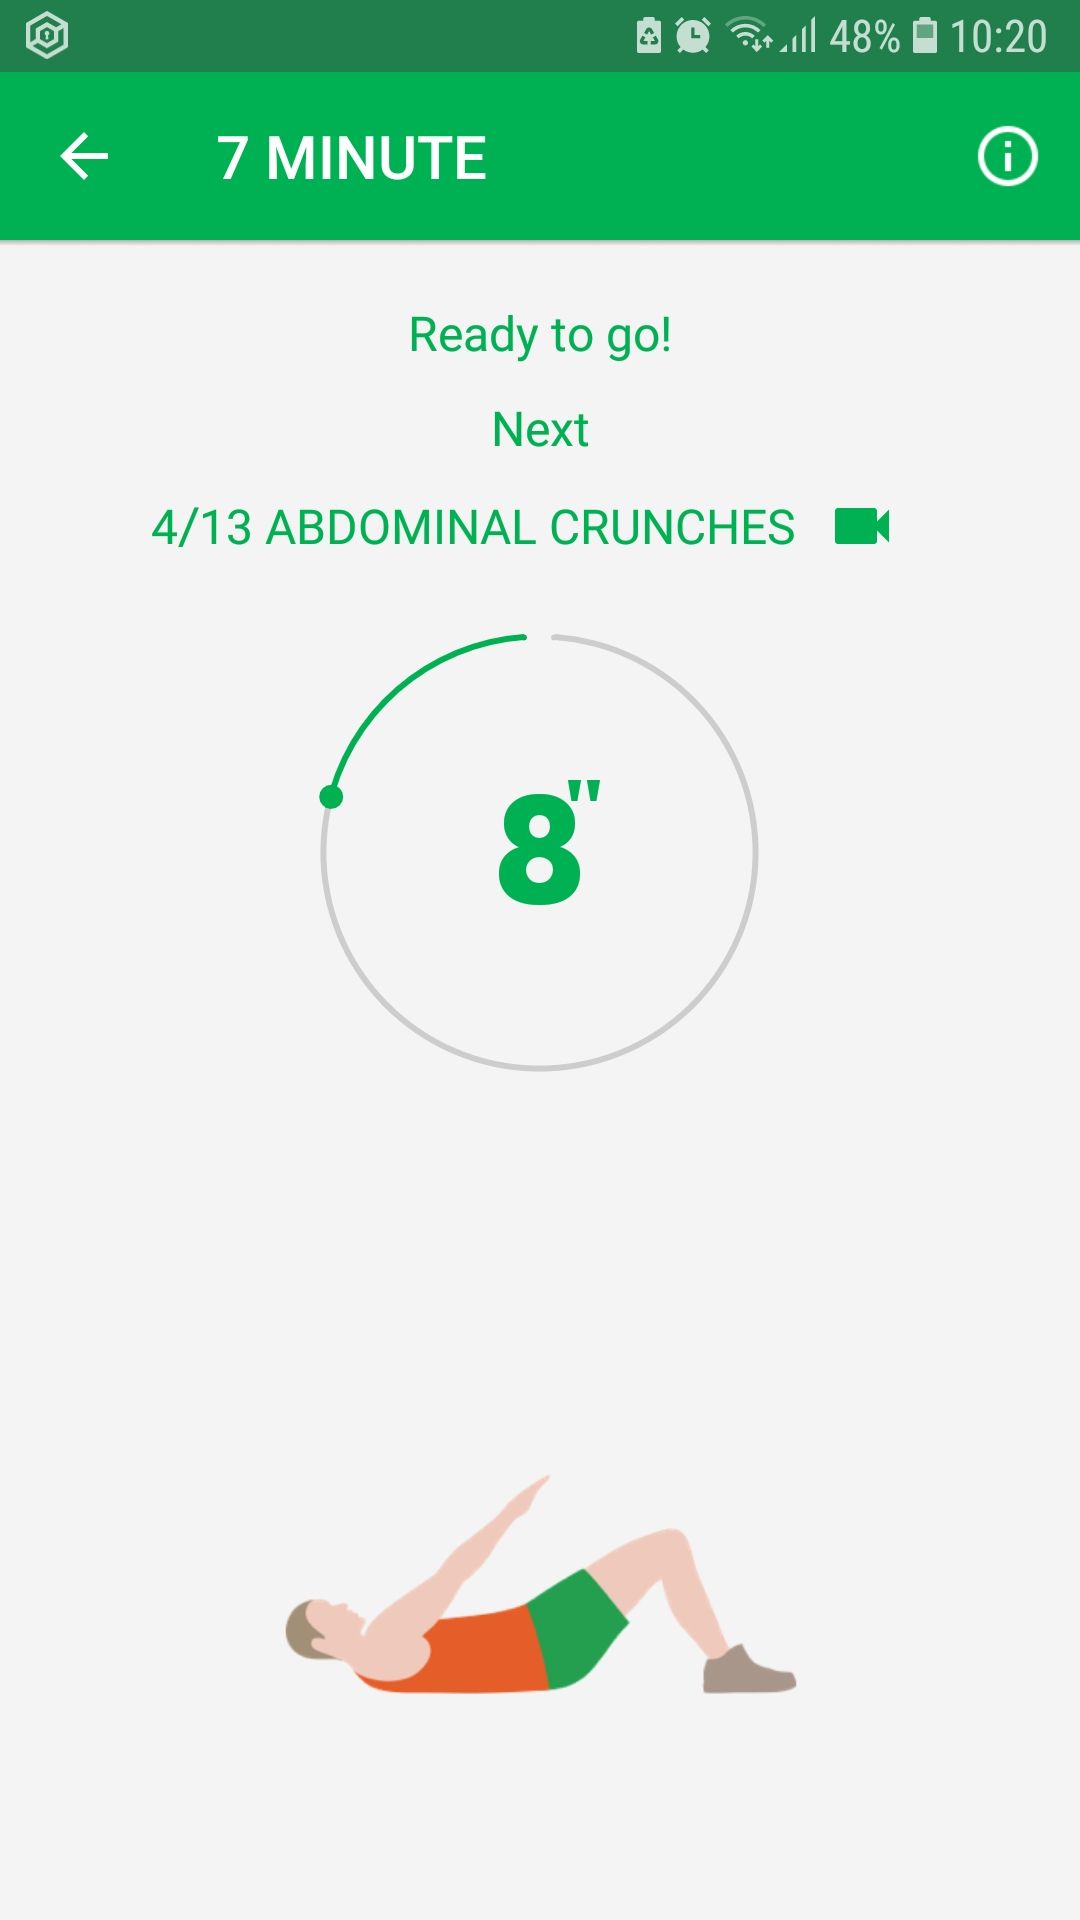 7 MINUTE WORKOUT mobile fitness app crunches